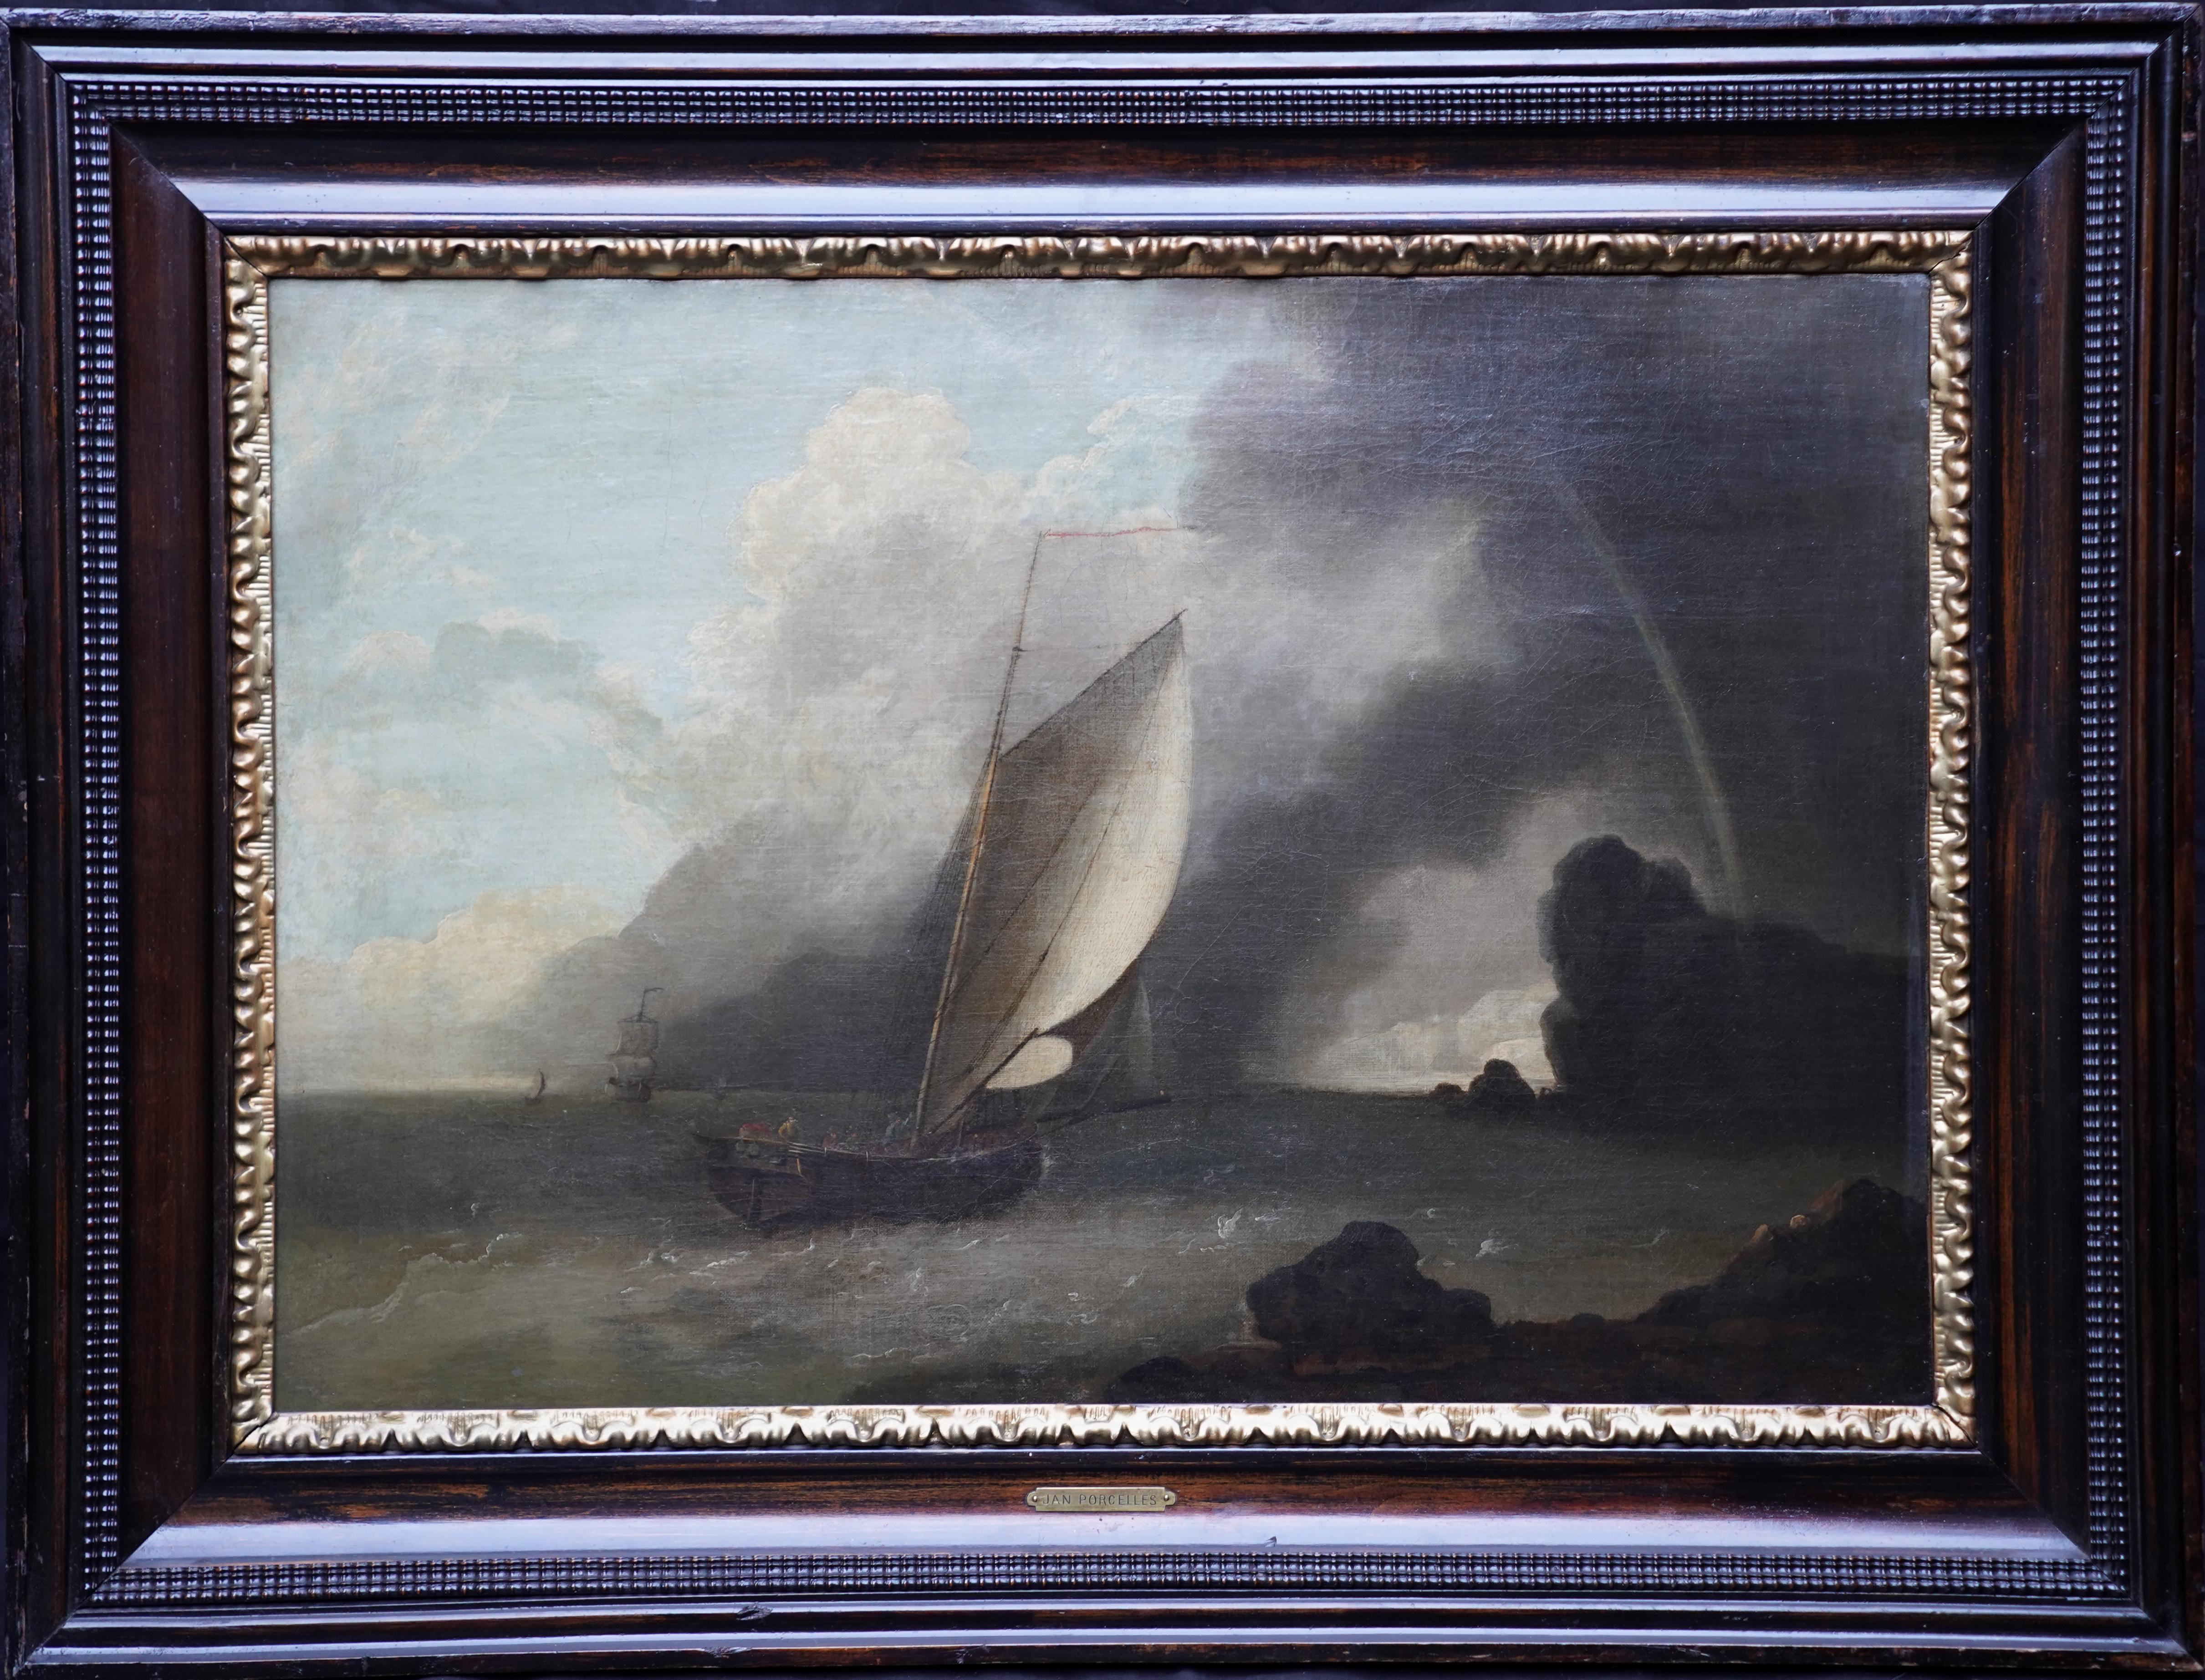 Jan Porcellis (att) Landscape Painting - A Shipping Scene in Stormy Weather - Dutch 17th century art marine oil painting